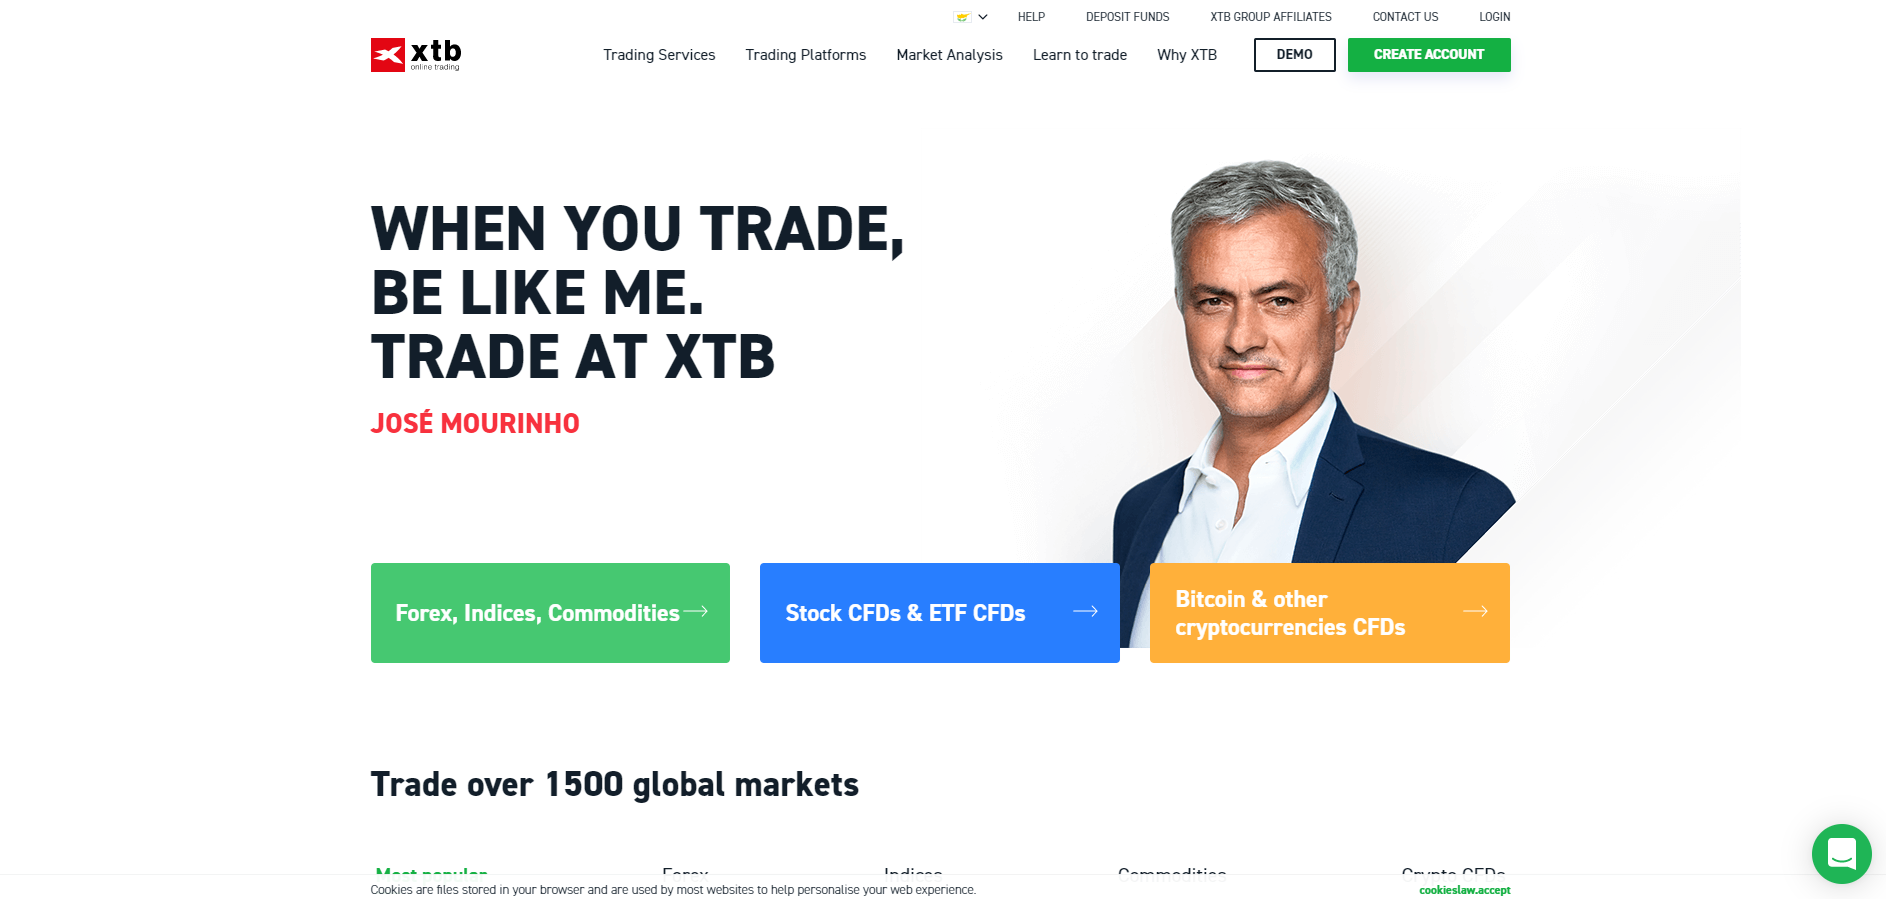 The official website of the forex broker XTB